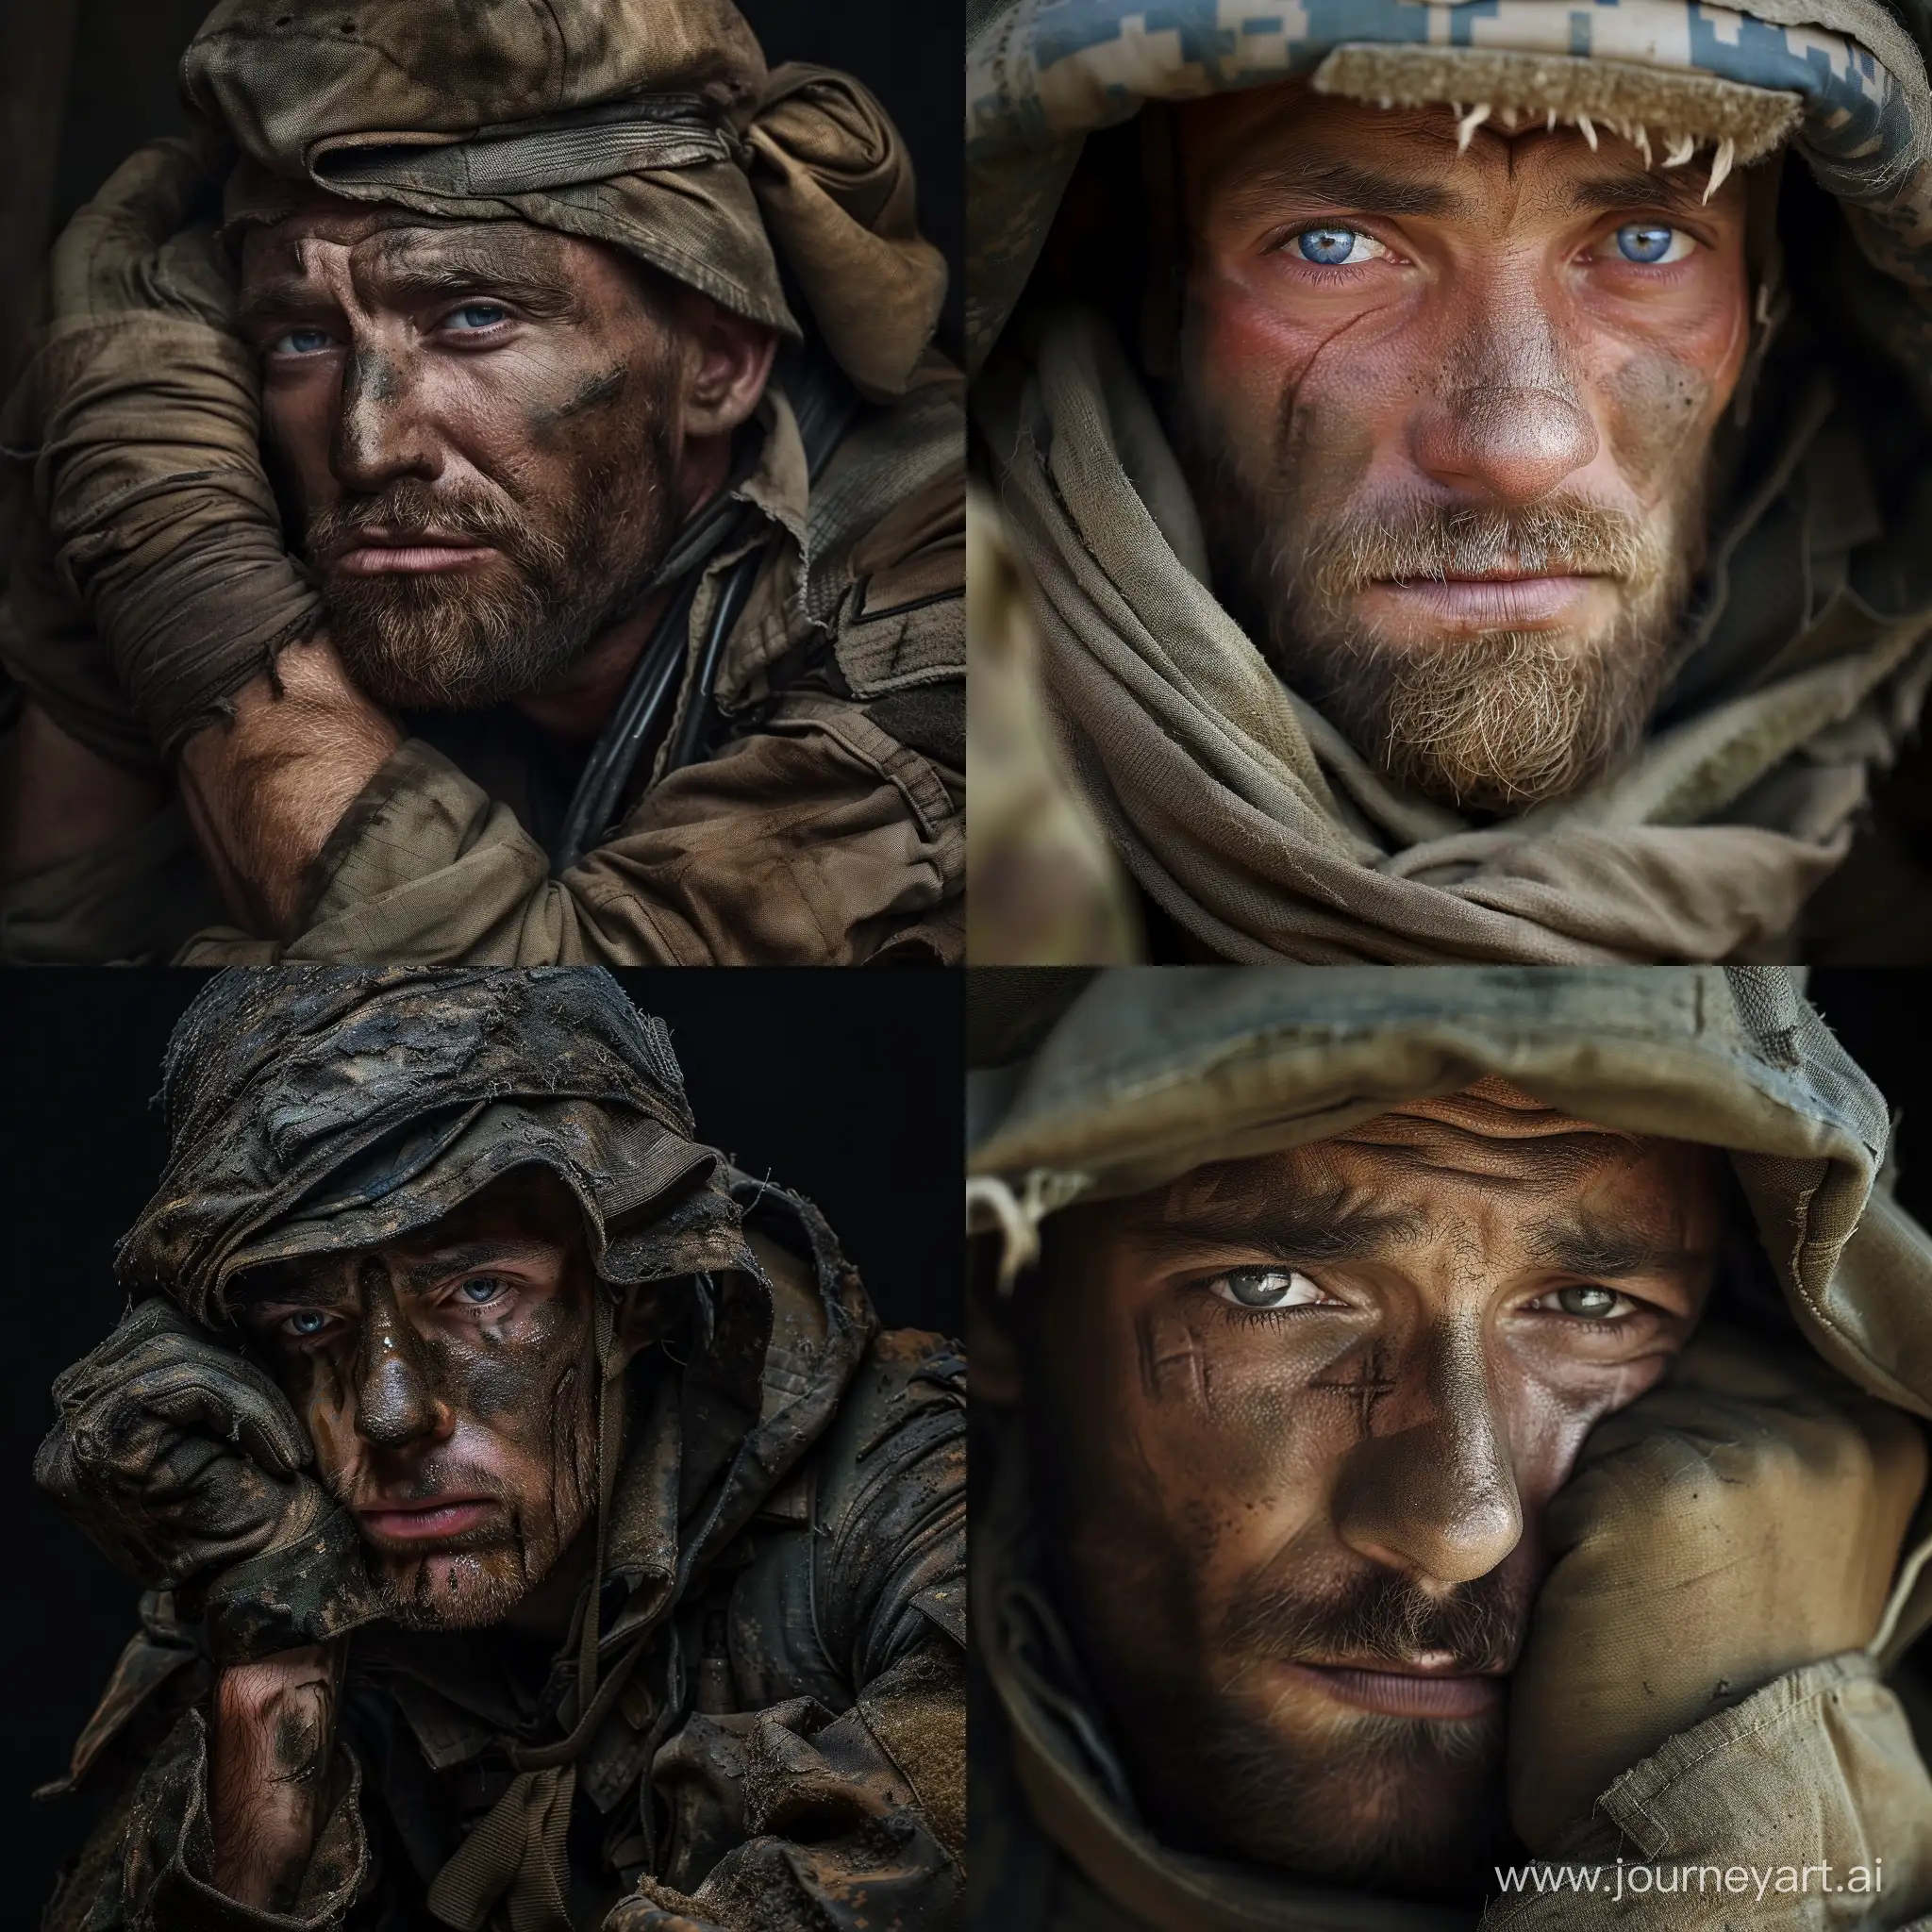 Weary-Soldier-Reflecting-A-Poignant-Portrait